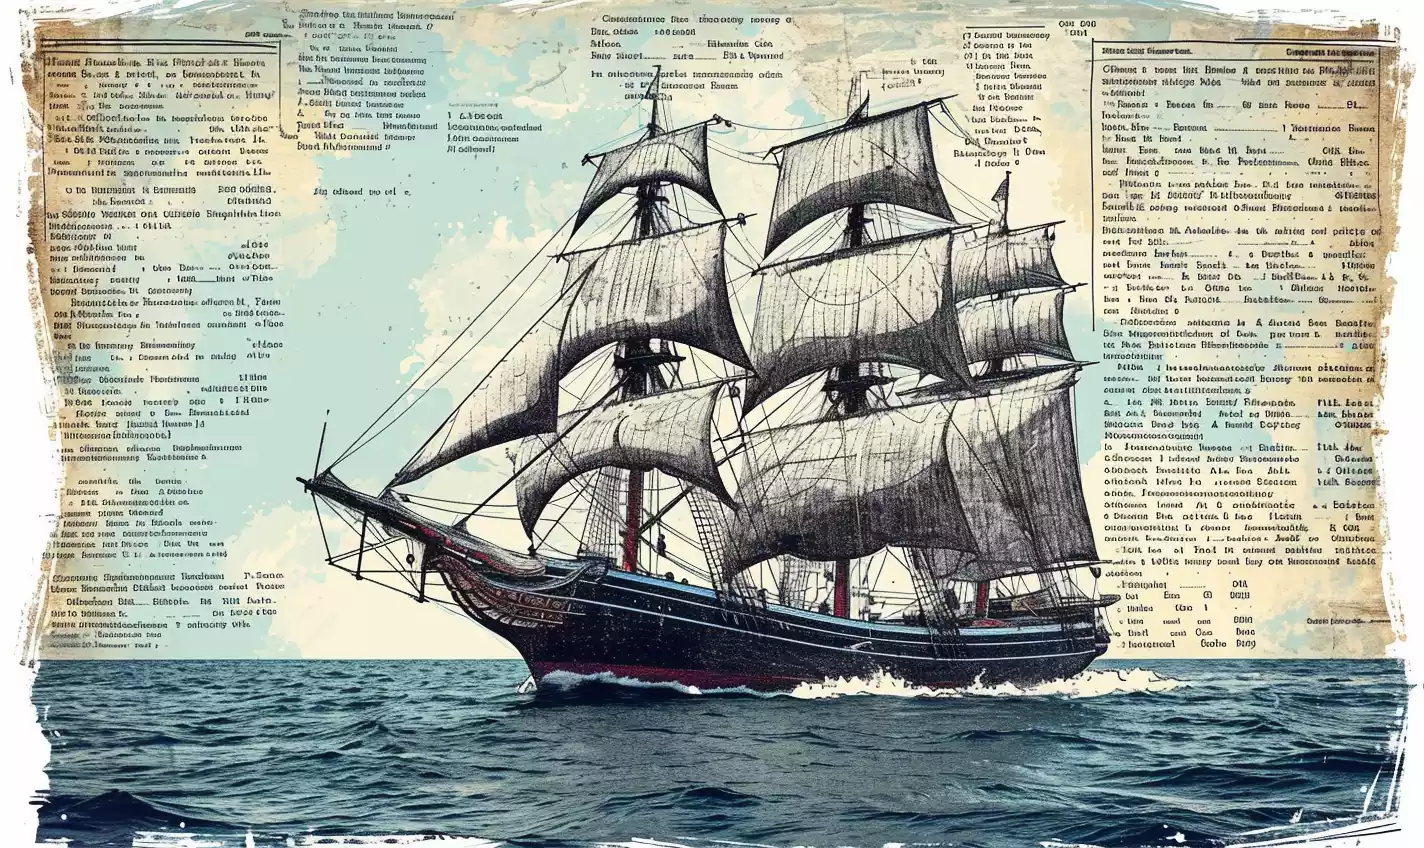 an hand-drawn sketch illustration of a ship embarking on a journey with various components representing the Convertible Note Agreement, Promissory Note, Term Sheet, Share Subscription Agreement, Investor Rights Agreement, and Disclosure Documents